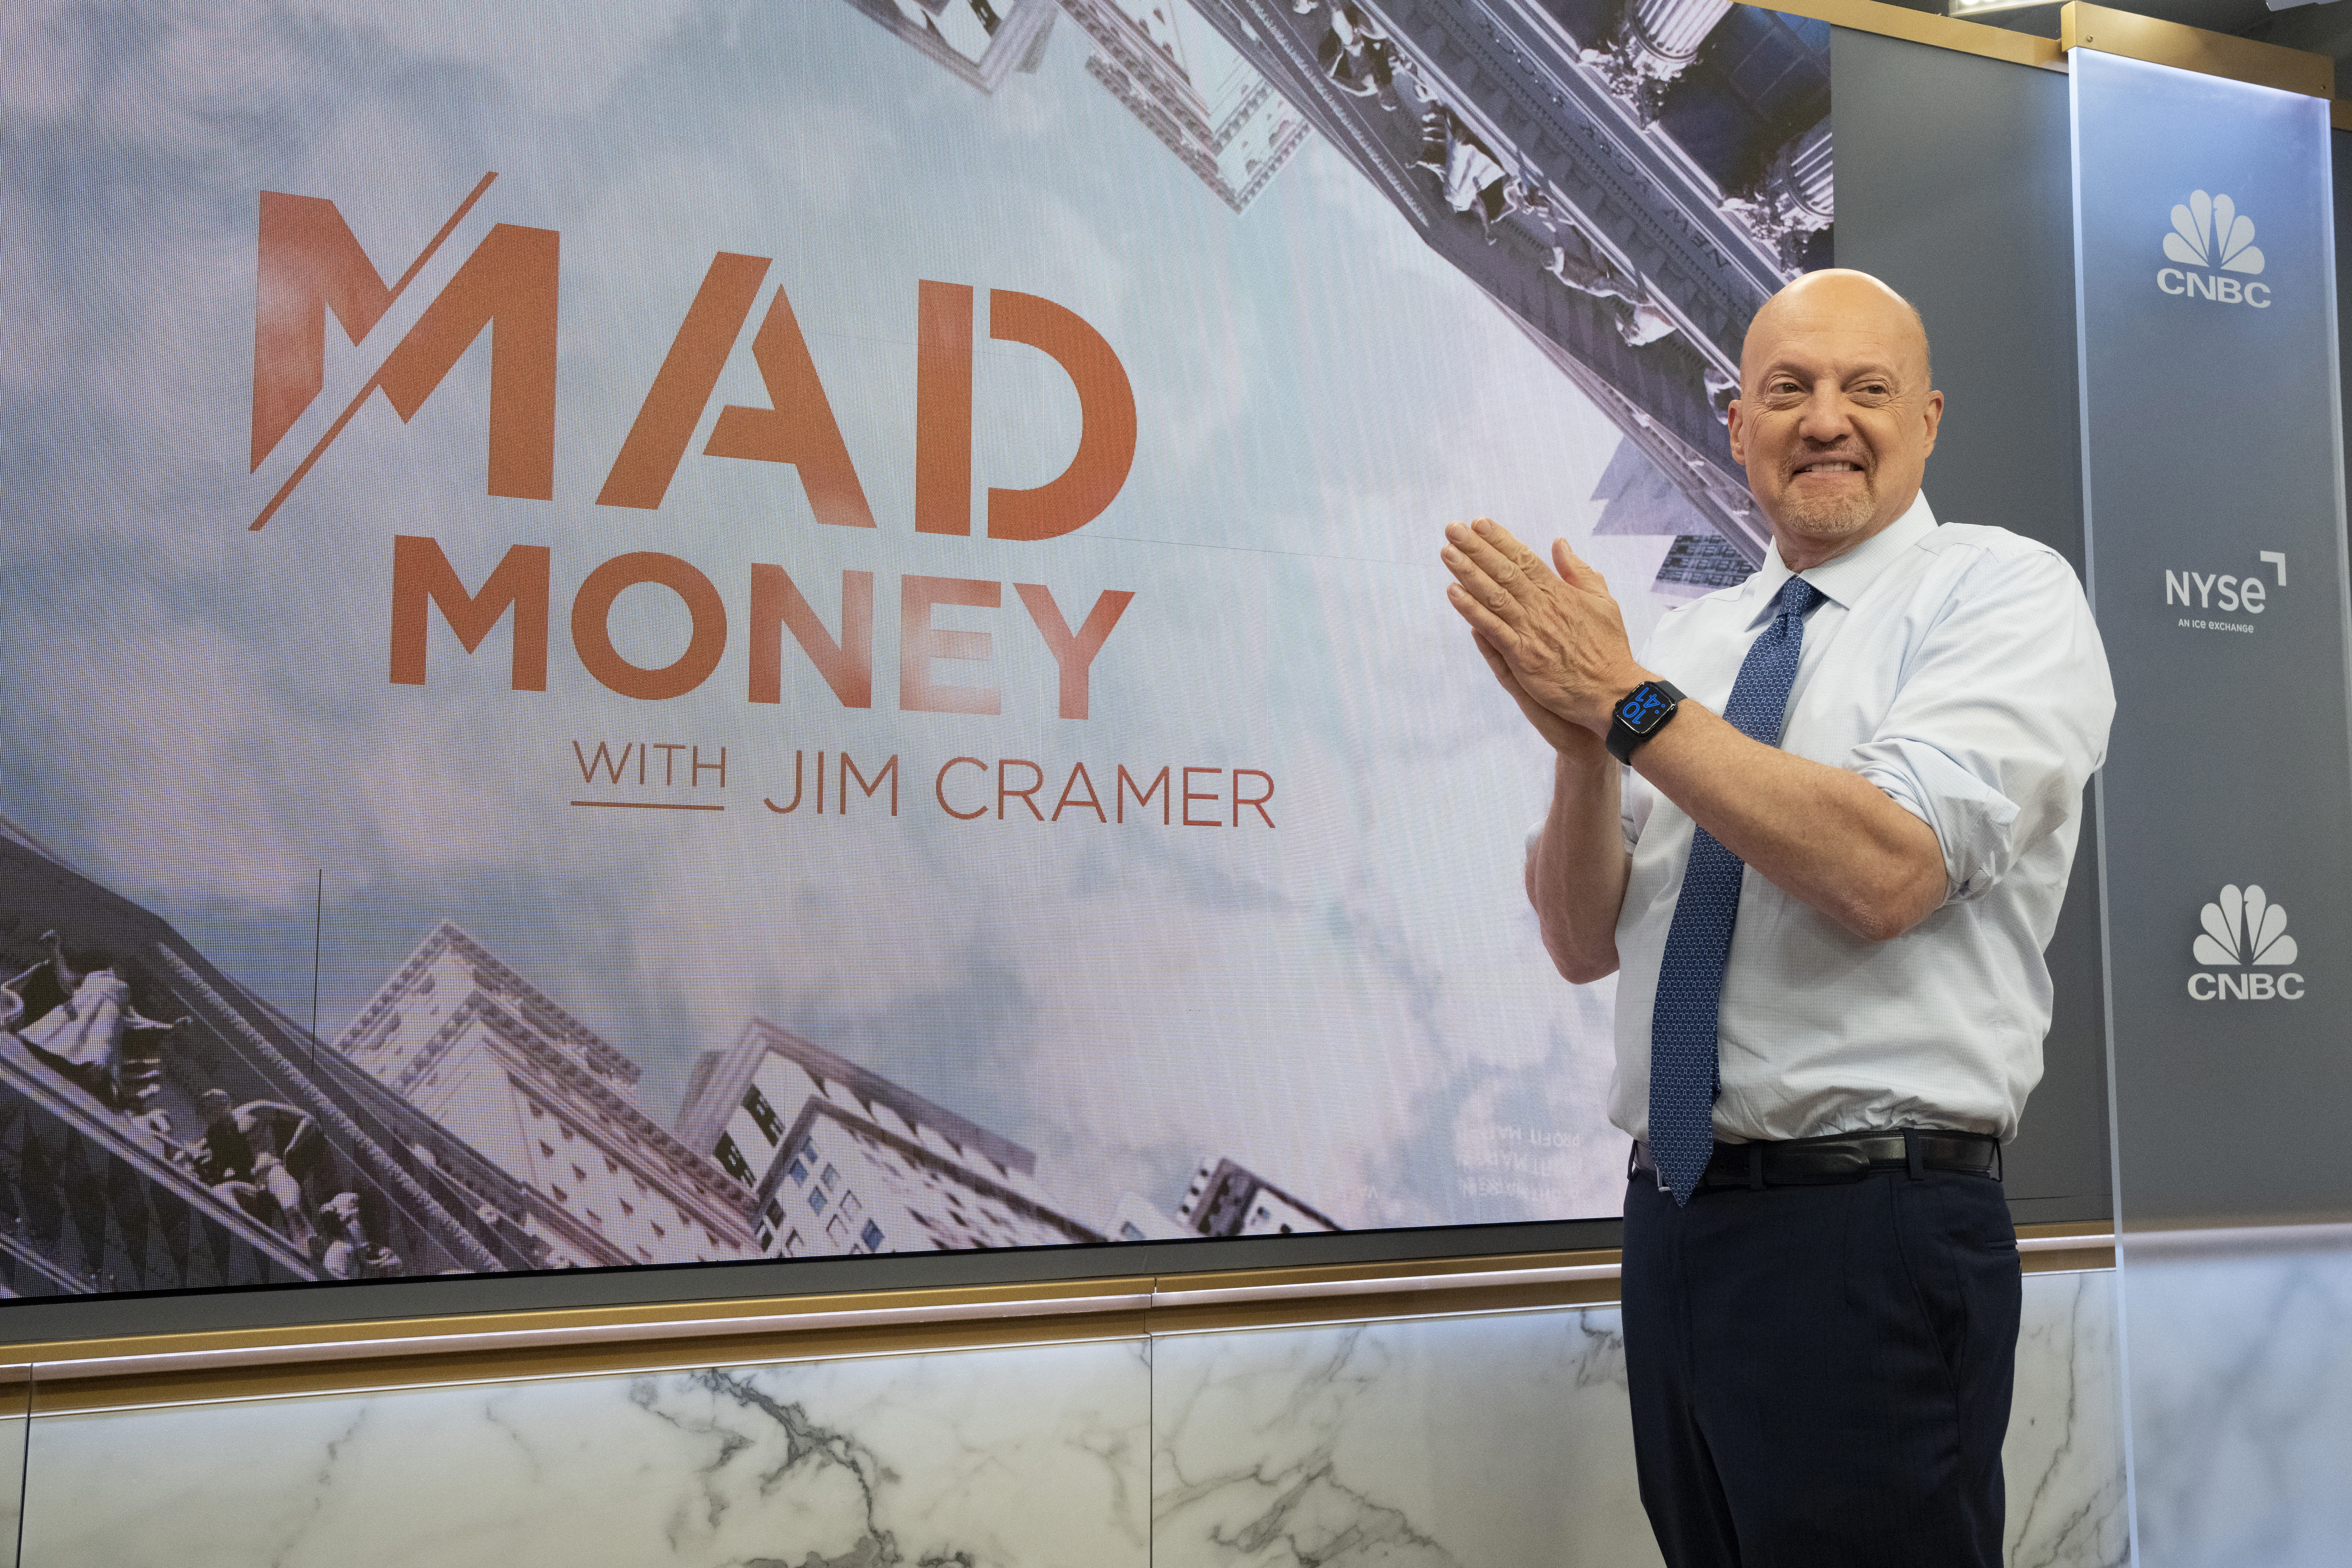 Jim Cramer’s week ahead: Earnings from Shopify, Marriott and Wendy’s